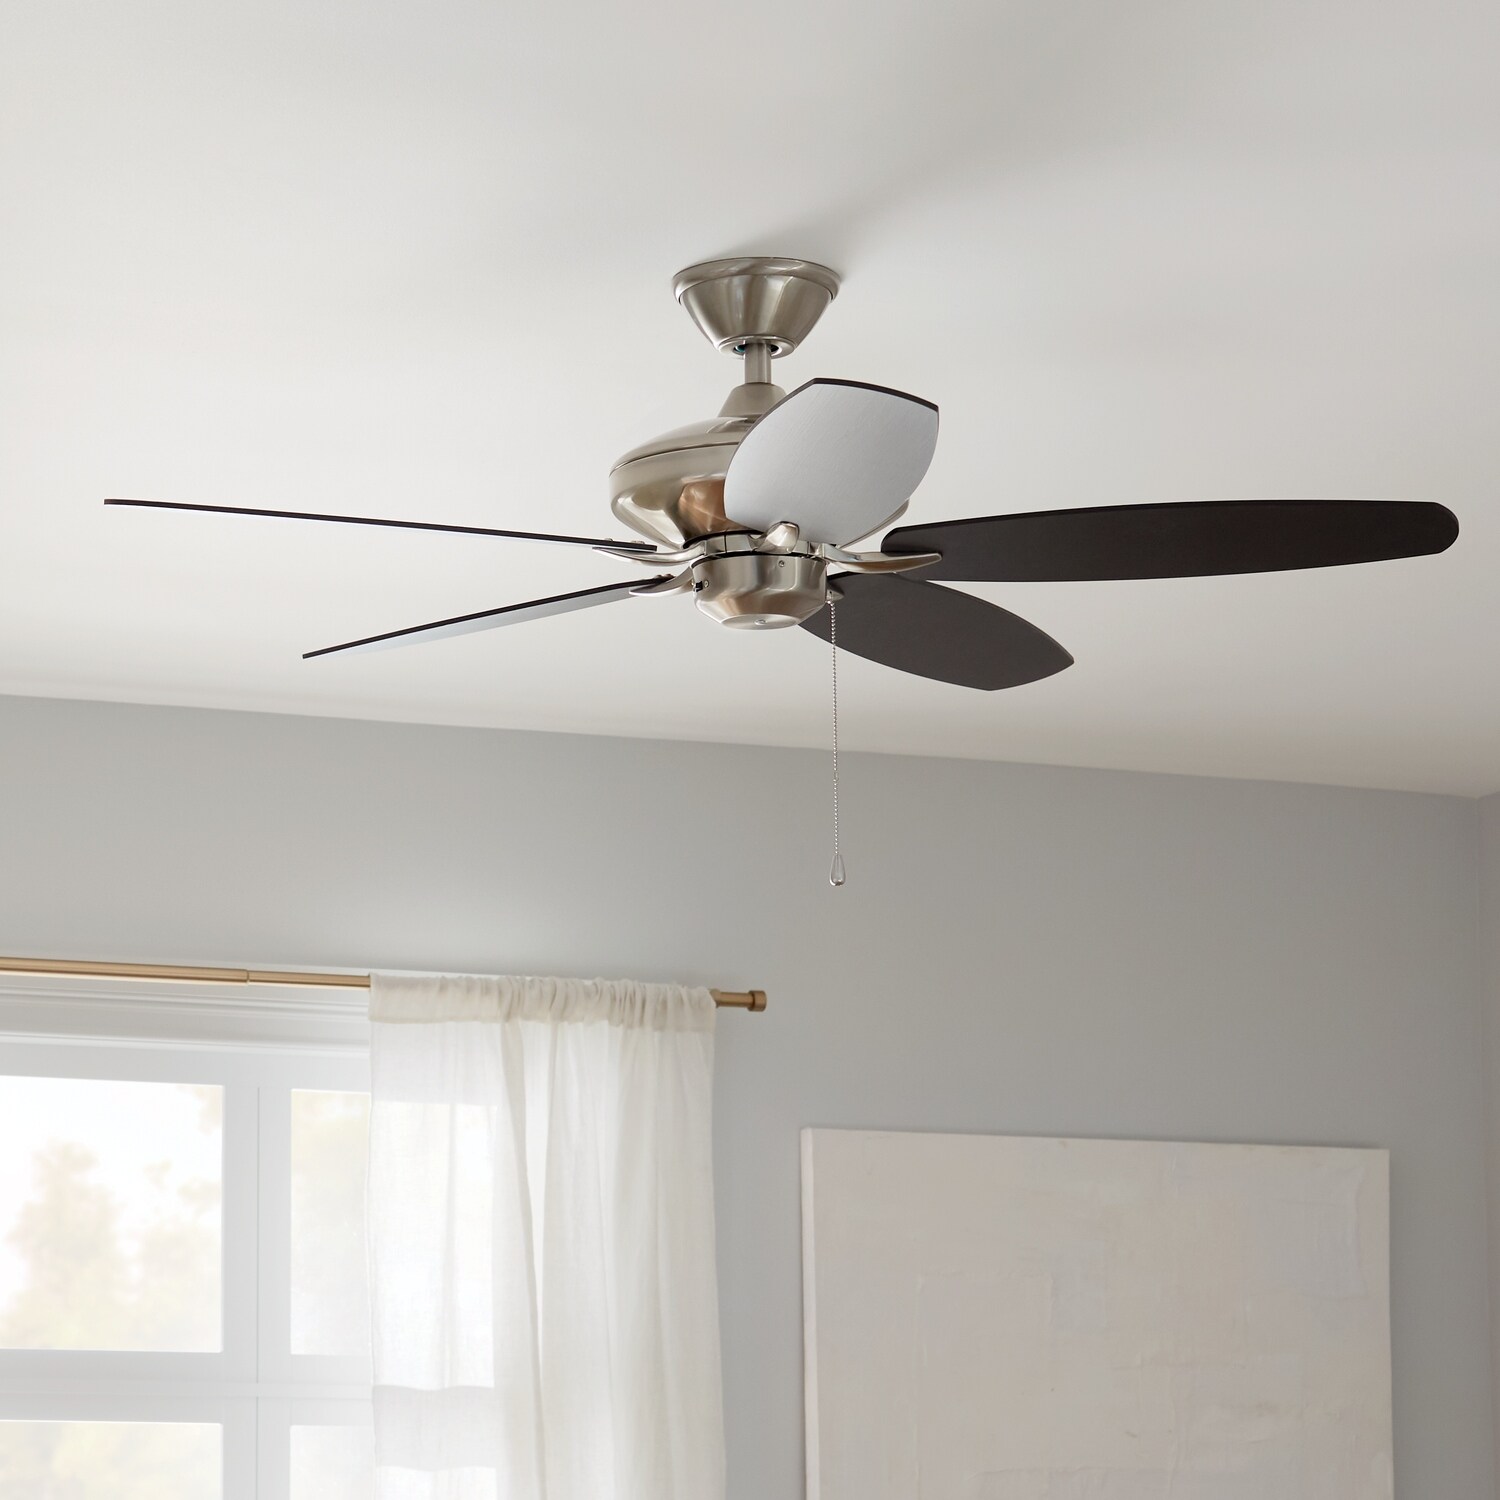 Kichler Renew 52 inch Ceiling Fan Brushed Stainless Steel with Reversible Blades